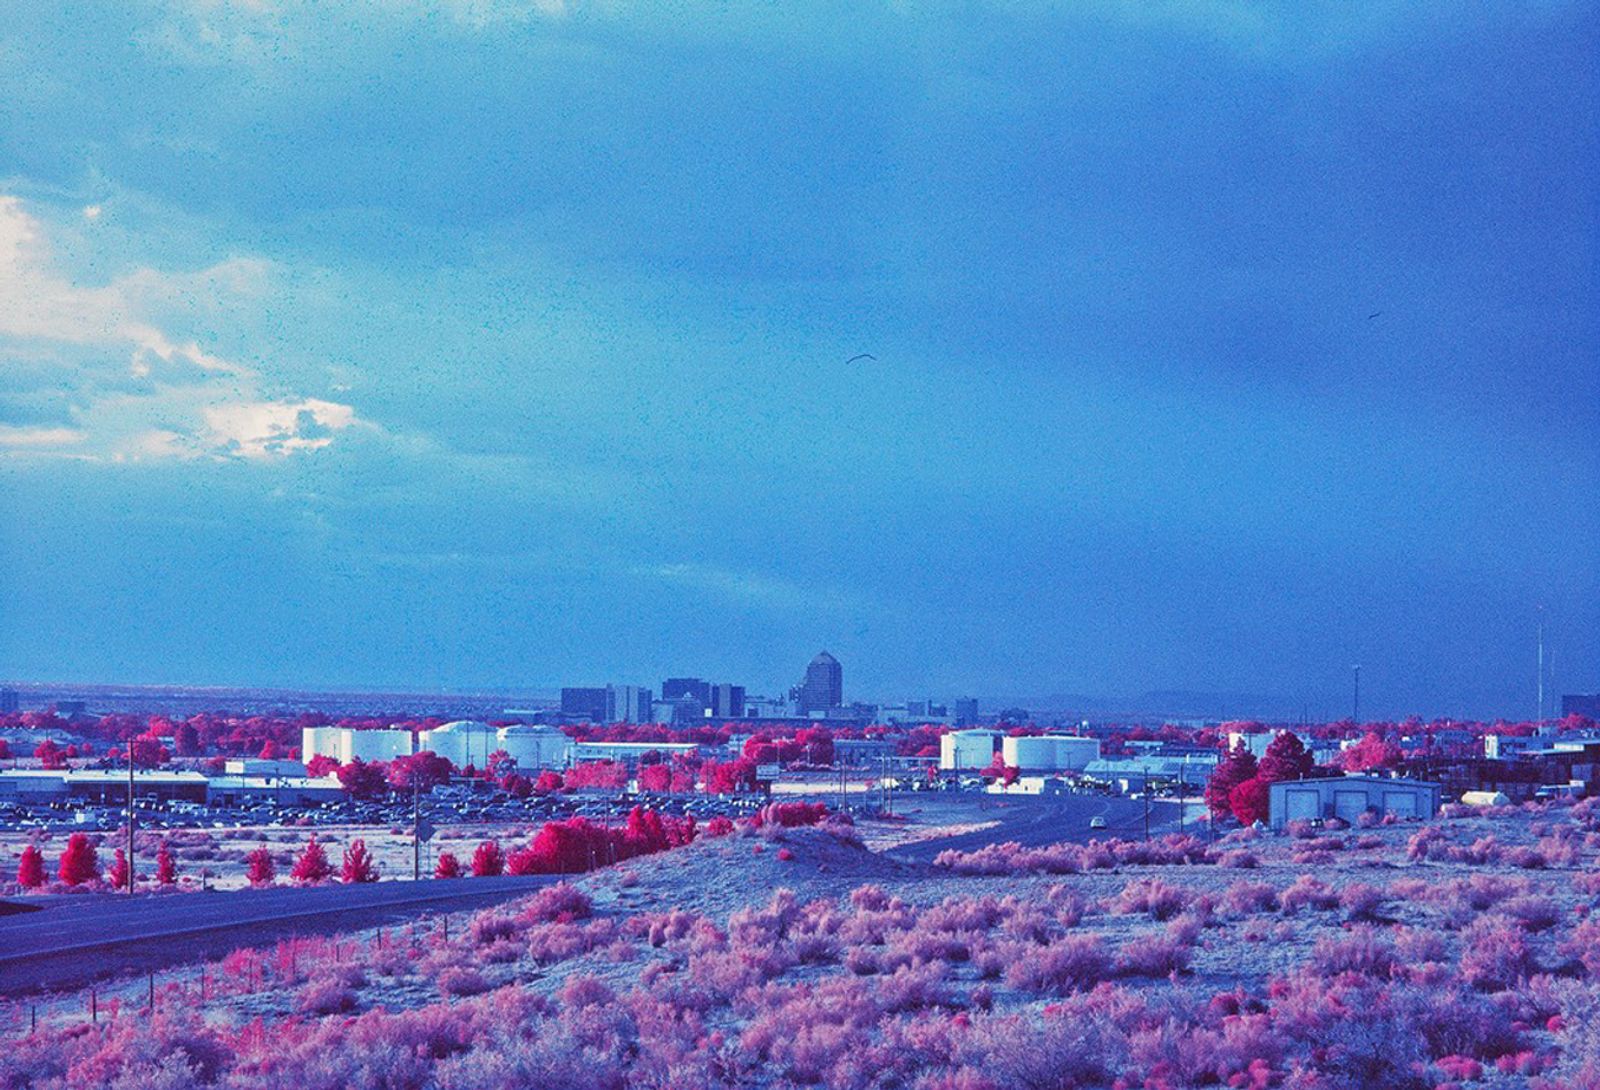 © Alejandra Aragon - 20. View from the "Little Mexico" neighborhood in Albuquerque. There is no home in Mexico to return from exile.